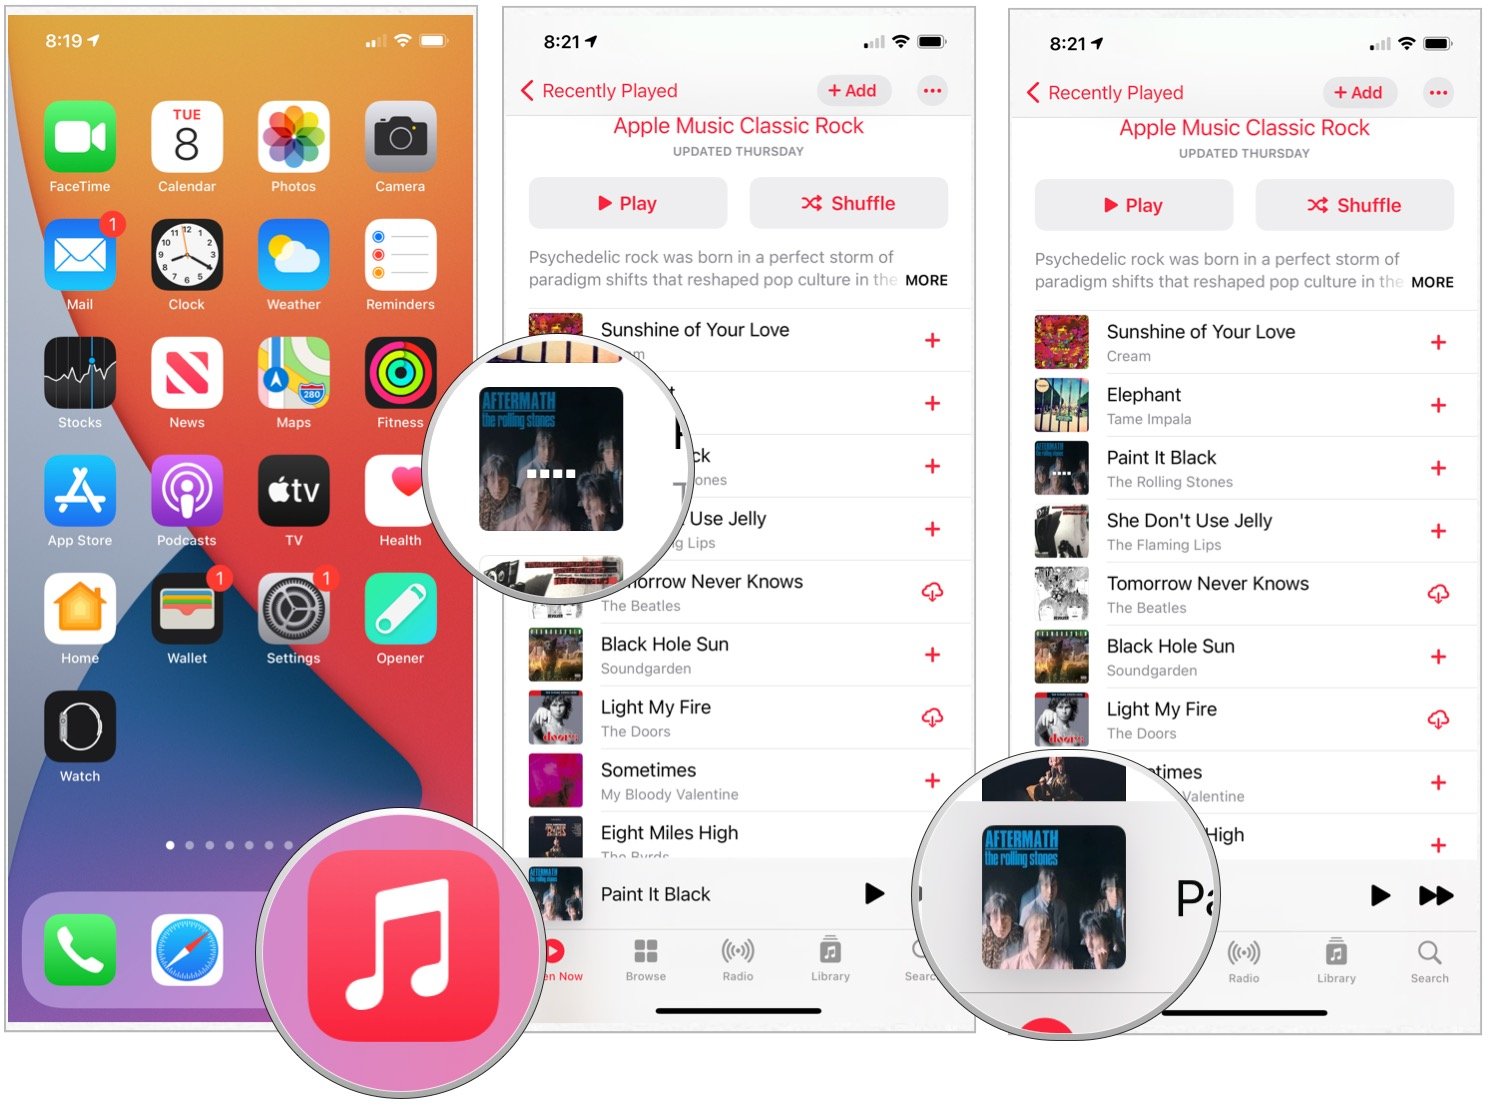 To find lyrics on your iPhone, tap the Music app on the device Home screen, then select a song to play. Tap the song that's playing to open the Now Playing screen.